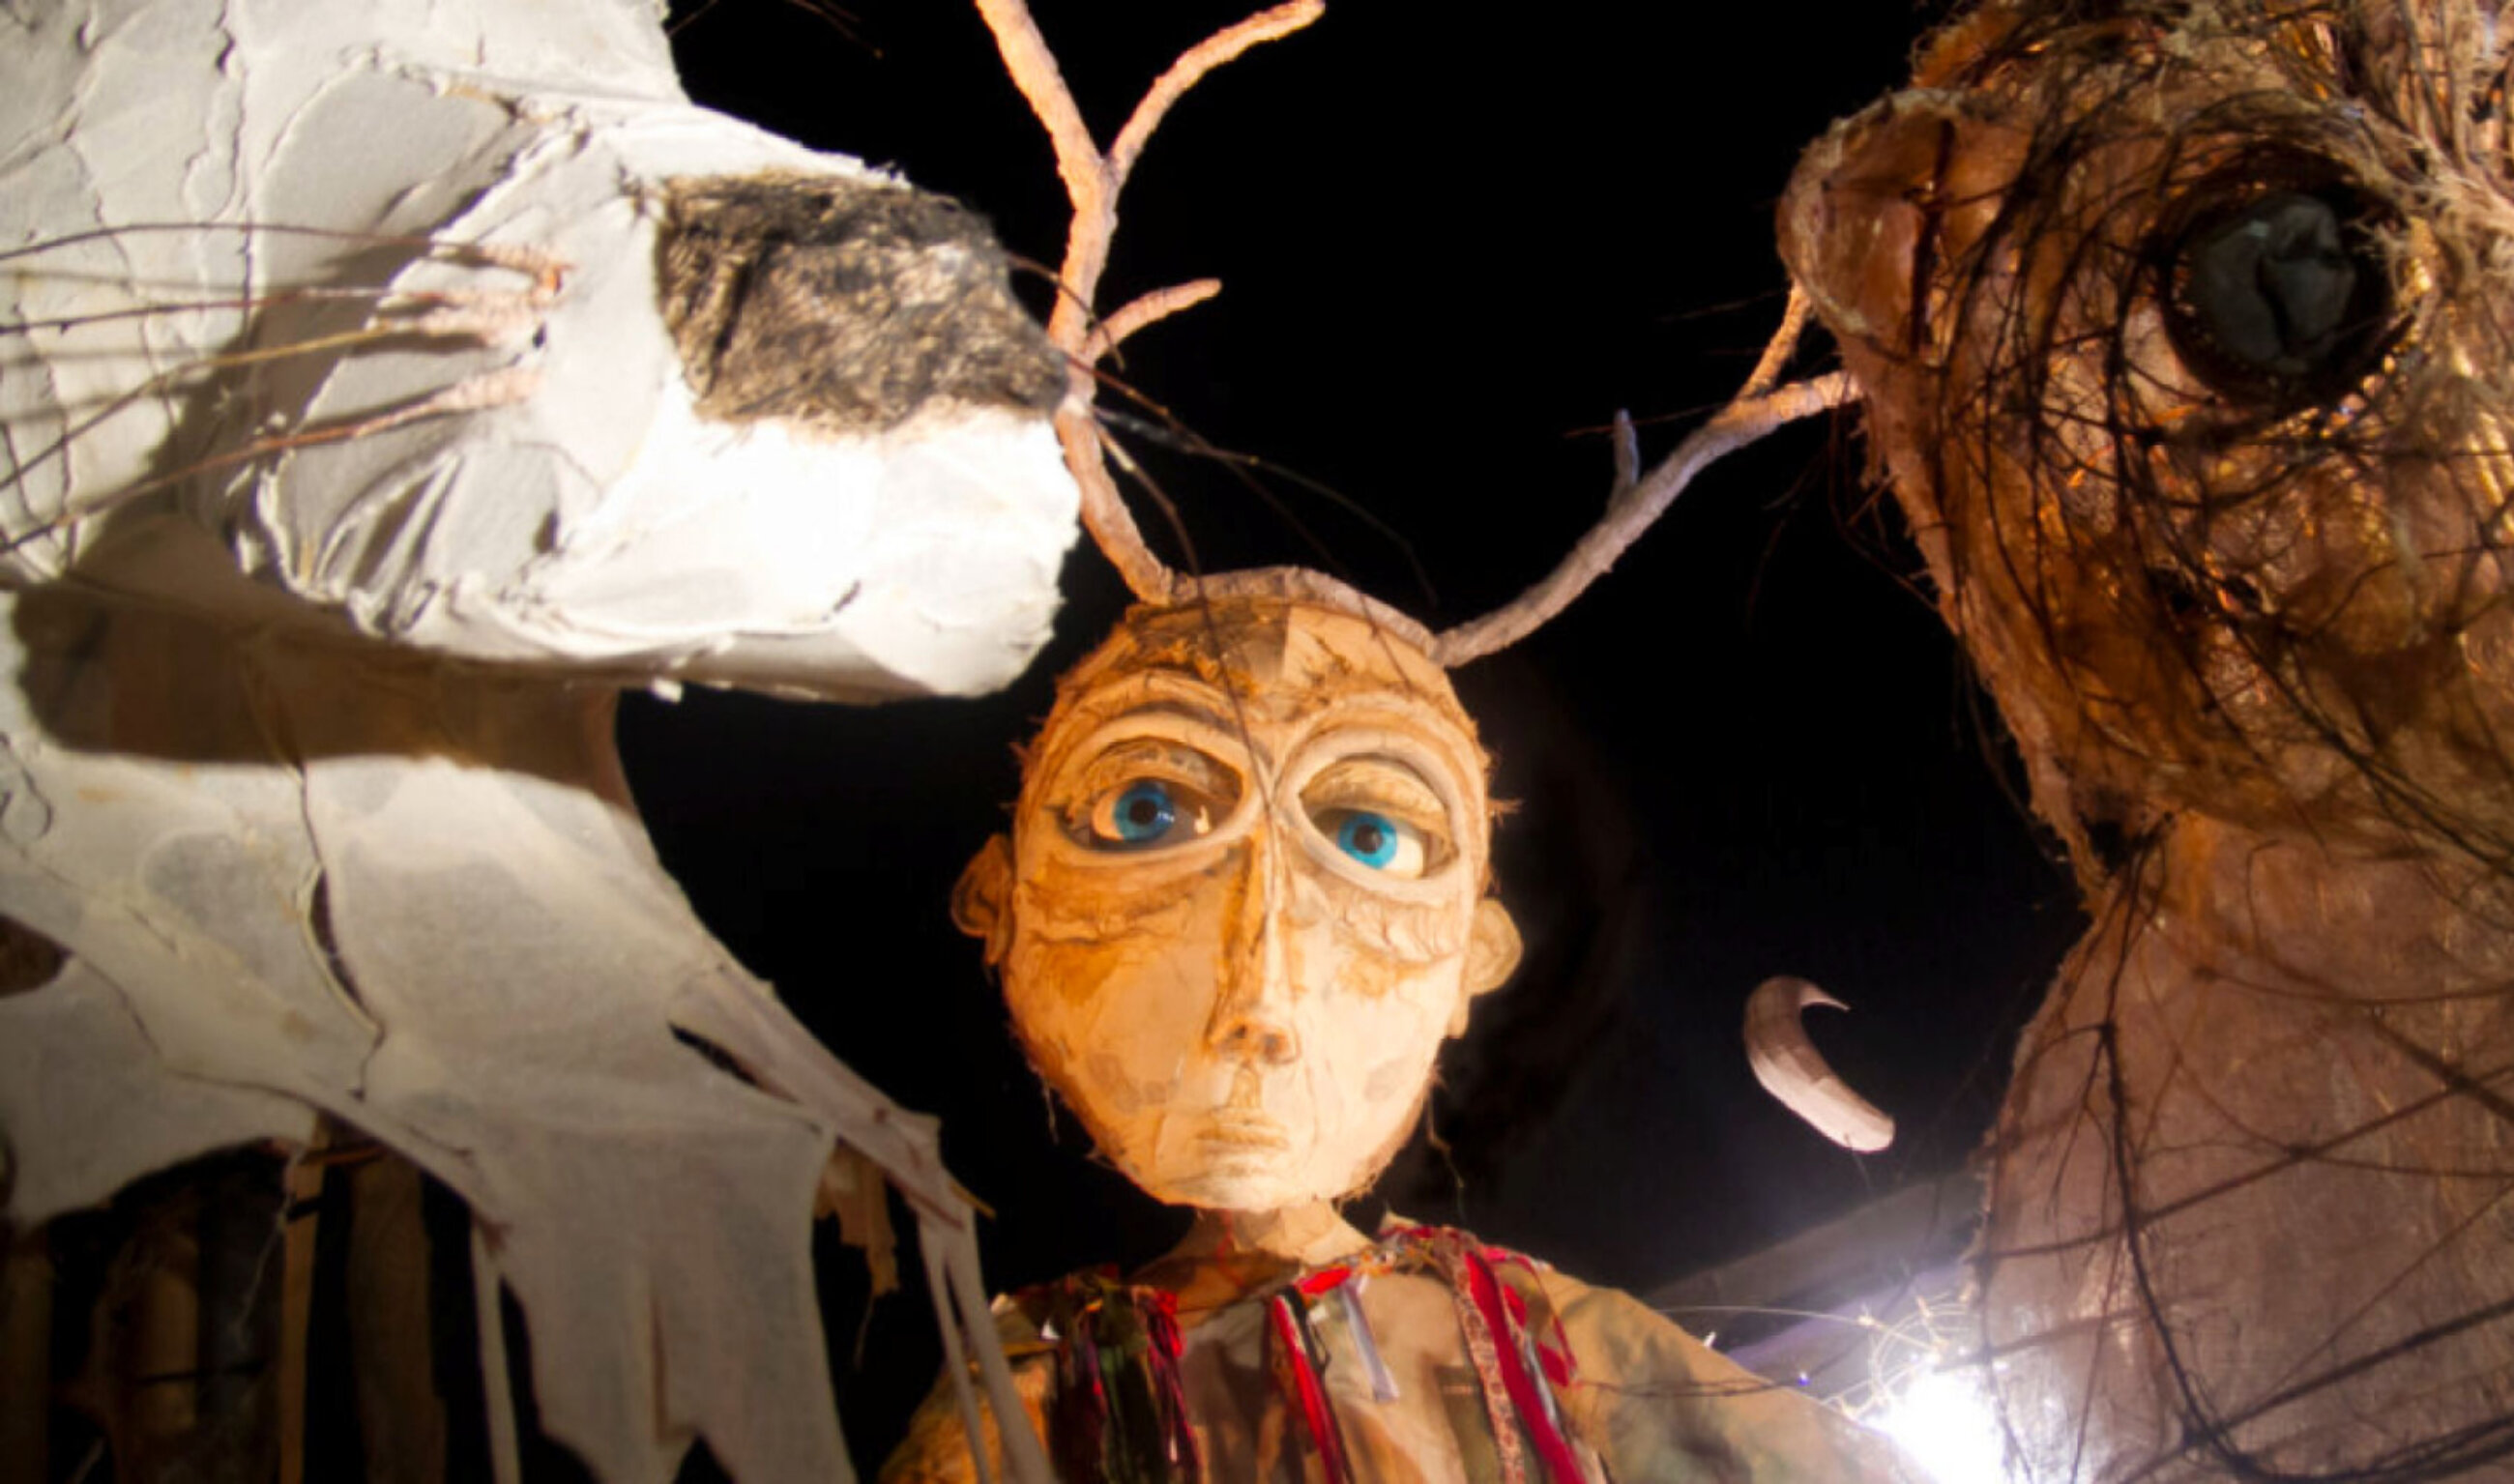 An ominous giant puppet face looking into camera with large blue eyes. 2 large animal puppets stand along side it. Image has black skies in background.